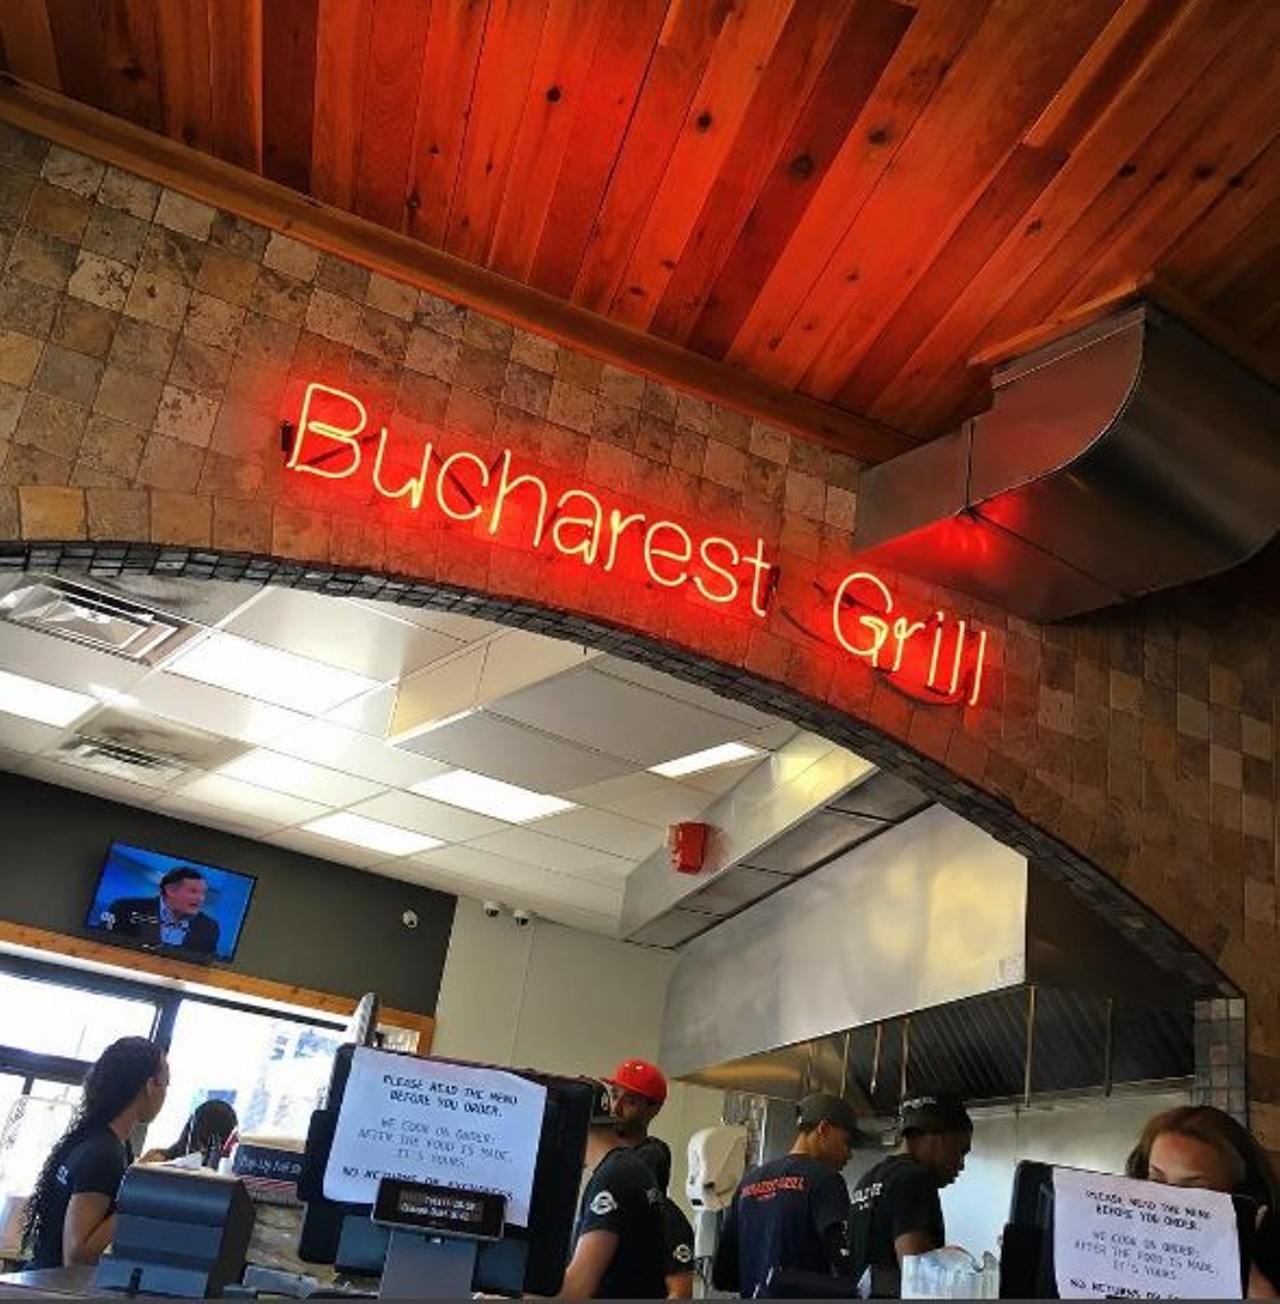 Bucharest
Multiple locations
(313) 965-3111
With affordable prices and three locations across Detroit this is a must visit. The food ranges from Traditional Romanian cuisine, to Middle Eastern dishes to hot dogs with all the fixings. Everything is handmade from original recipes to give it that authentic taste.
Photo via IG user @sierrachevelle